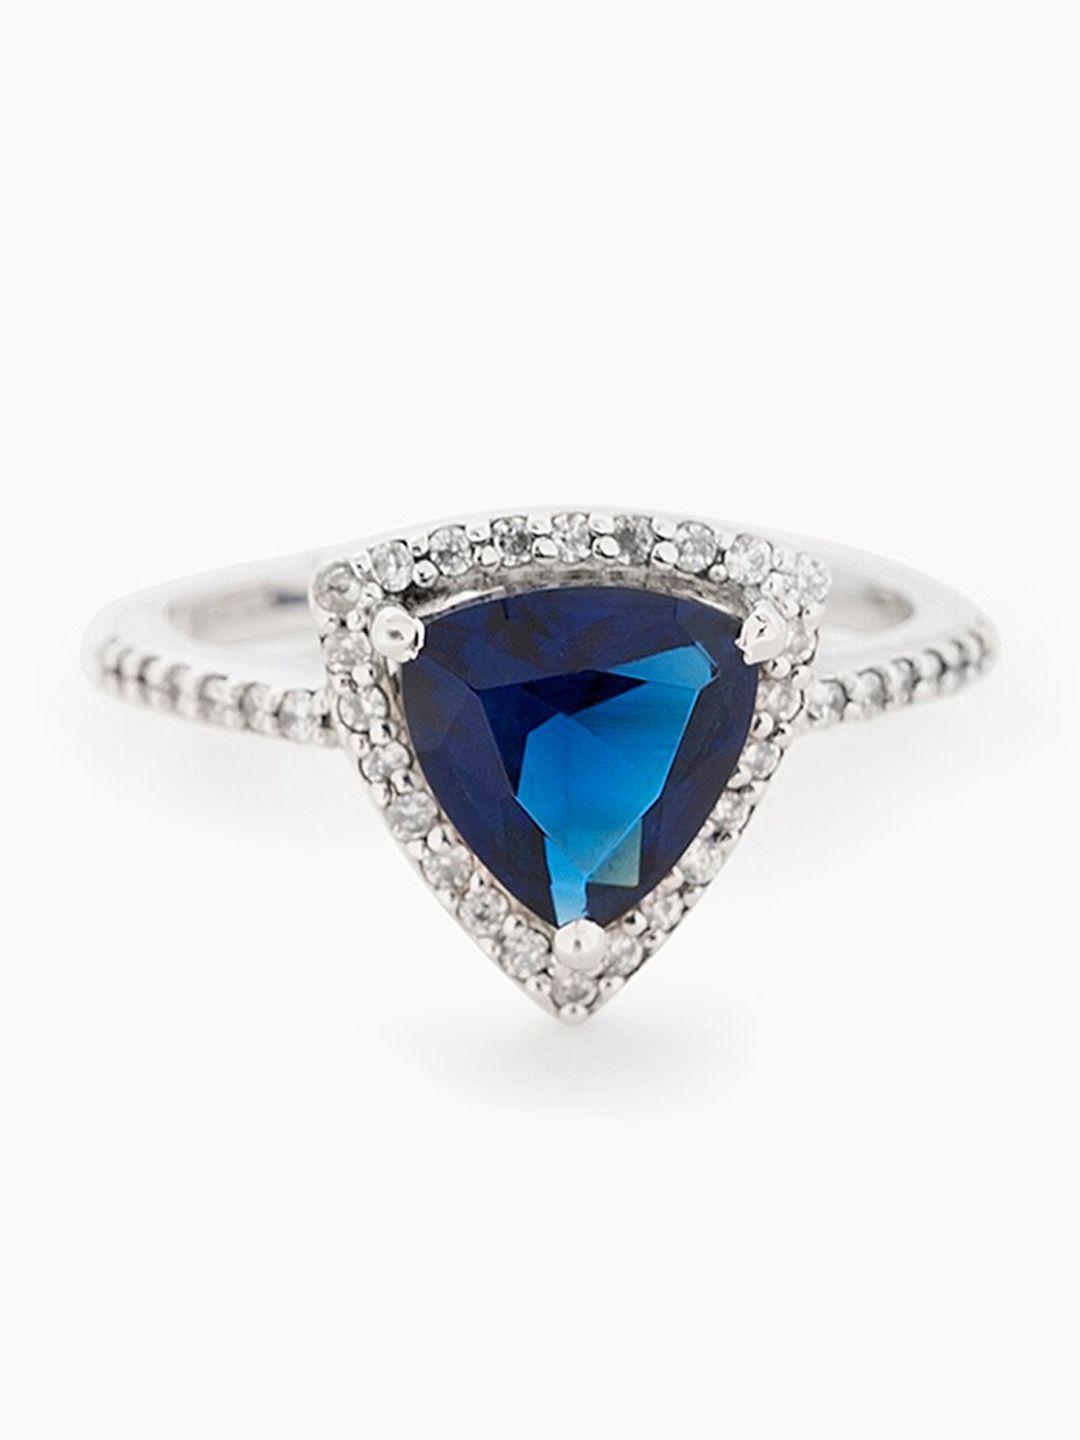 mikoto by fablestreet rhodium-plated 925 sterling silver & blue statement zircon ring